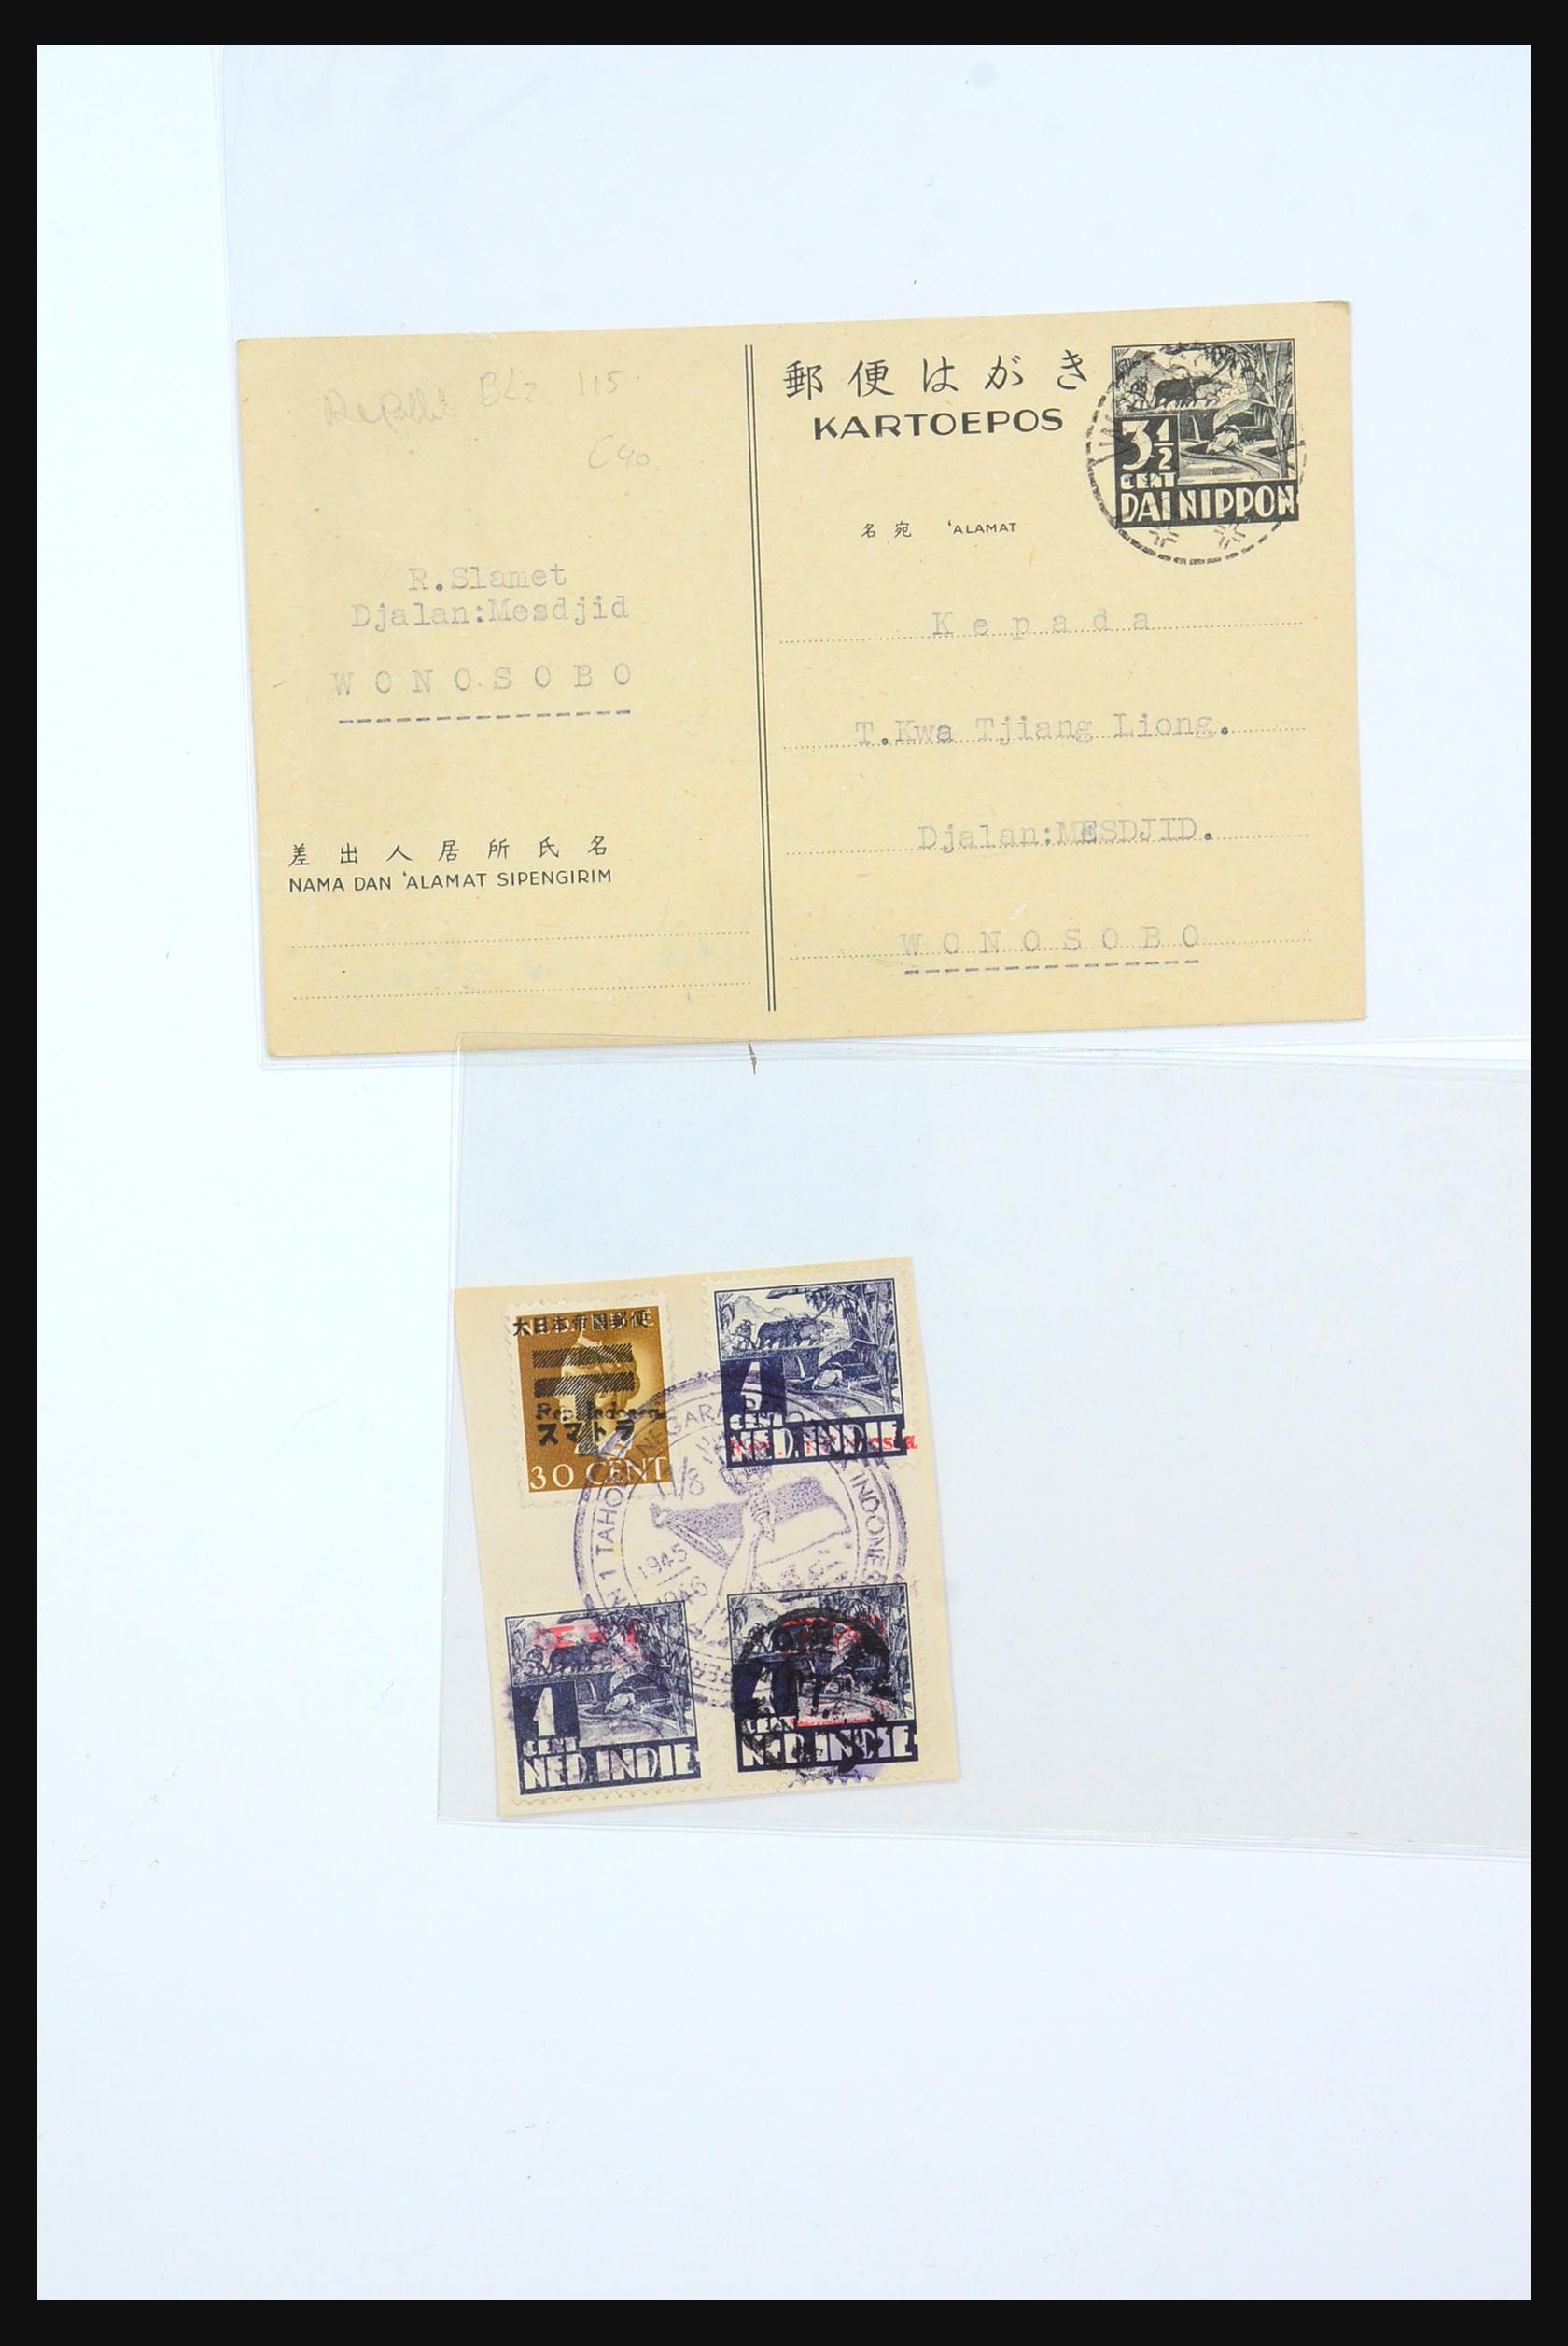 31362 021 - 31362 Netherlands Indies Japanese occupation covers 1942-1945.